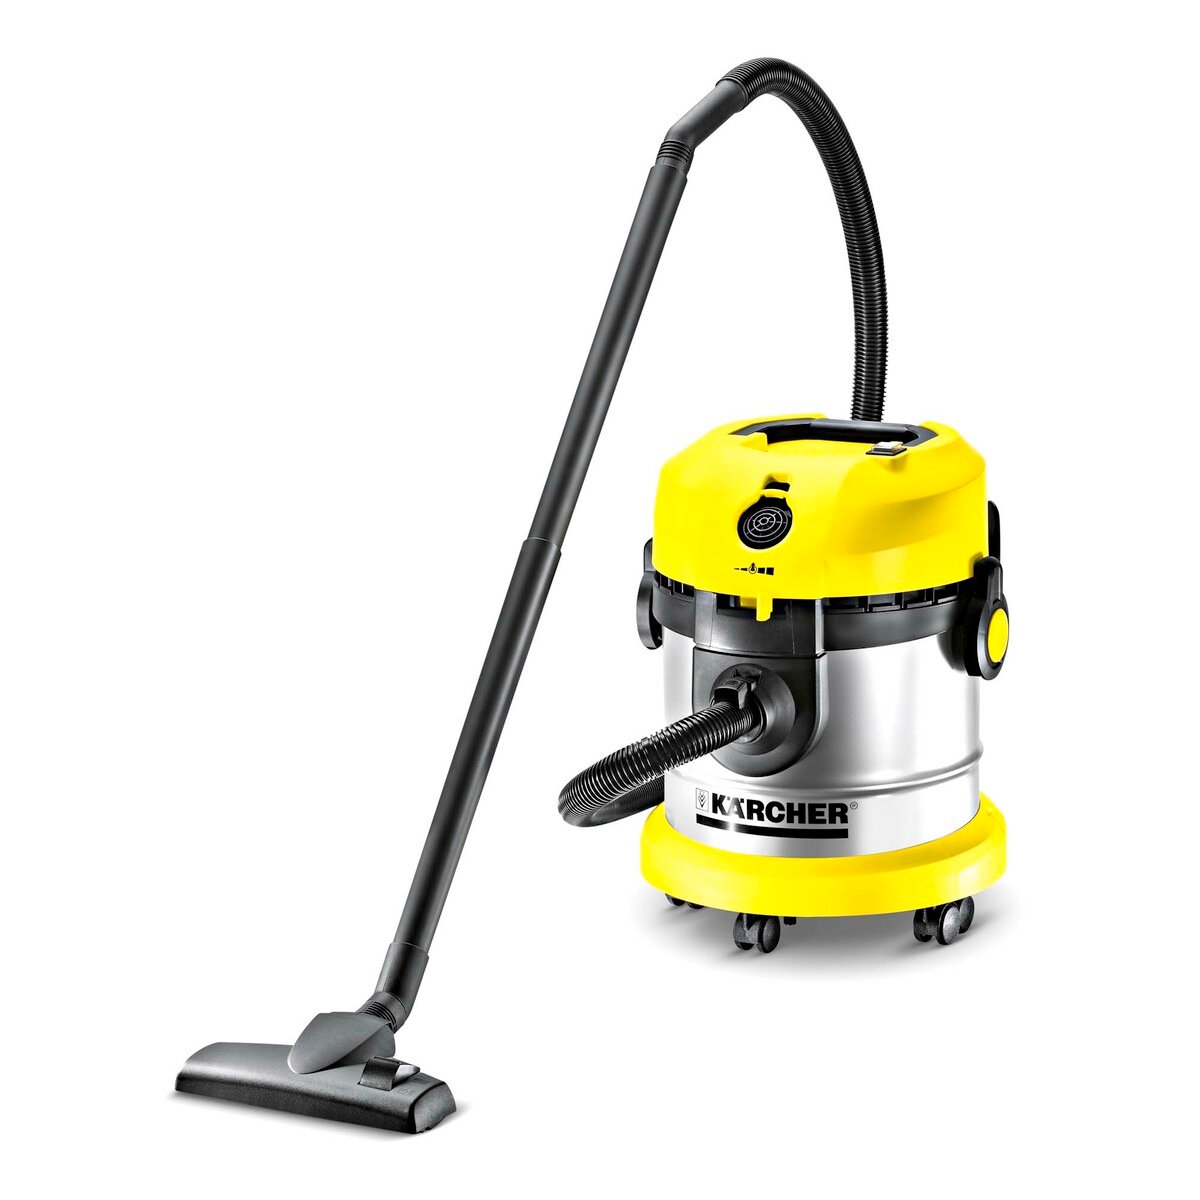 Karcher Wet And Dry Vaccum Cleaner, 20 L, 1600W, VC 1800